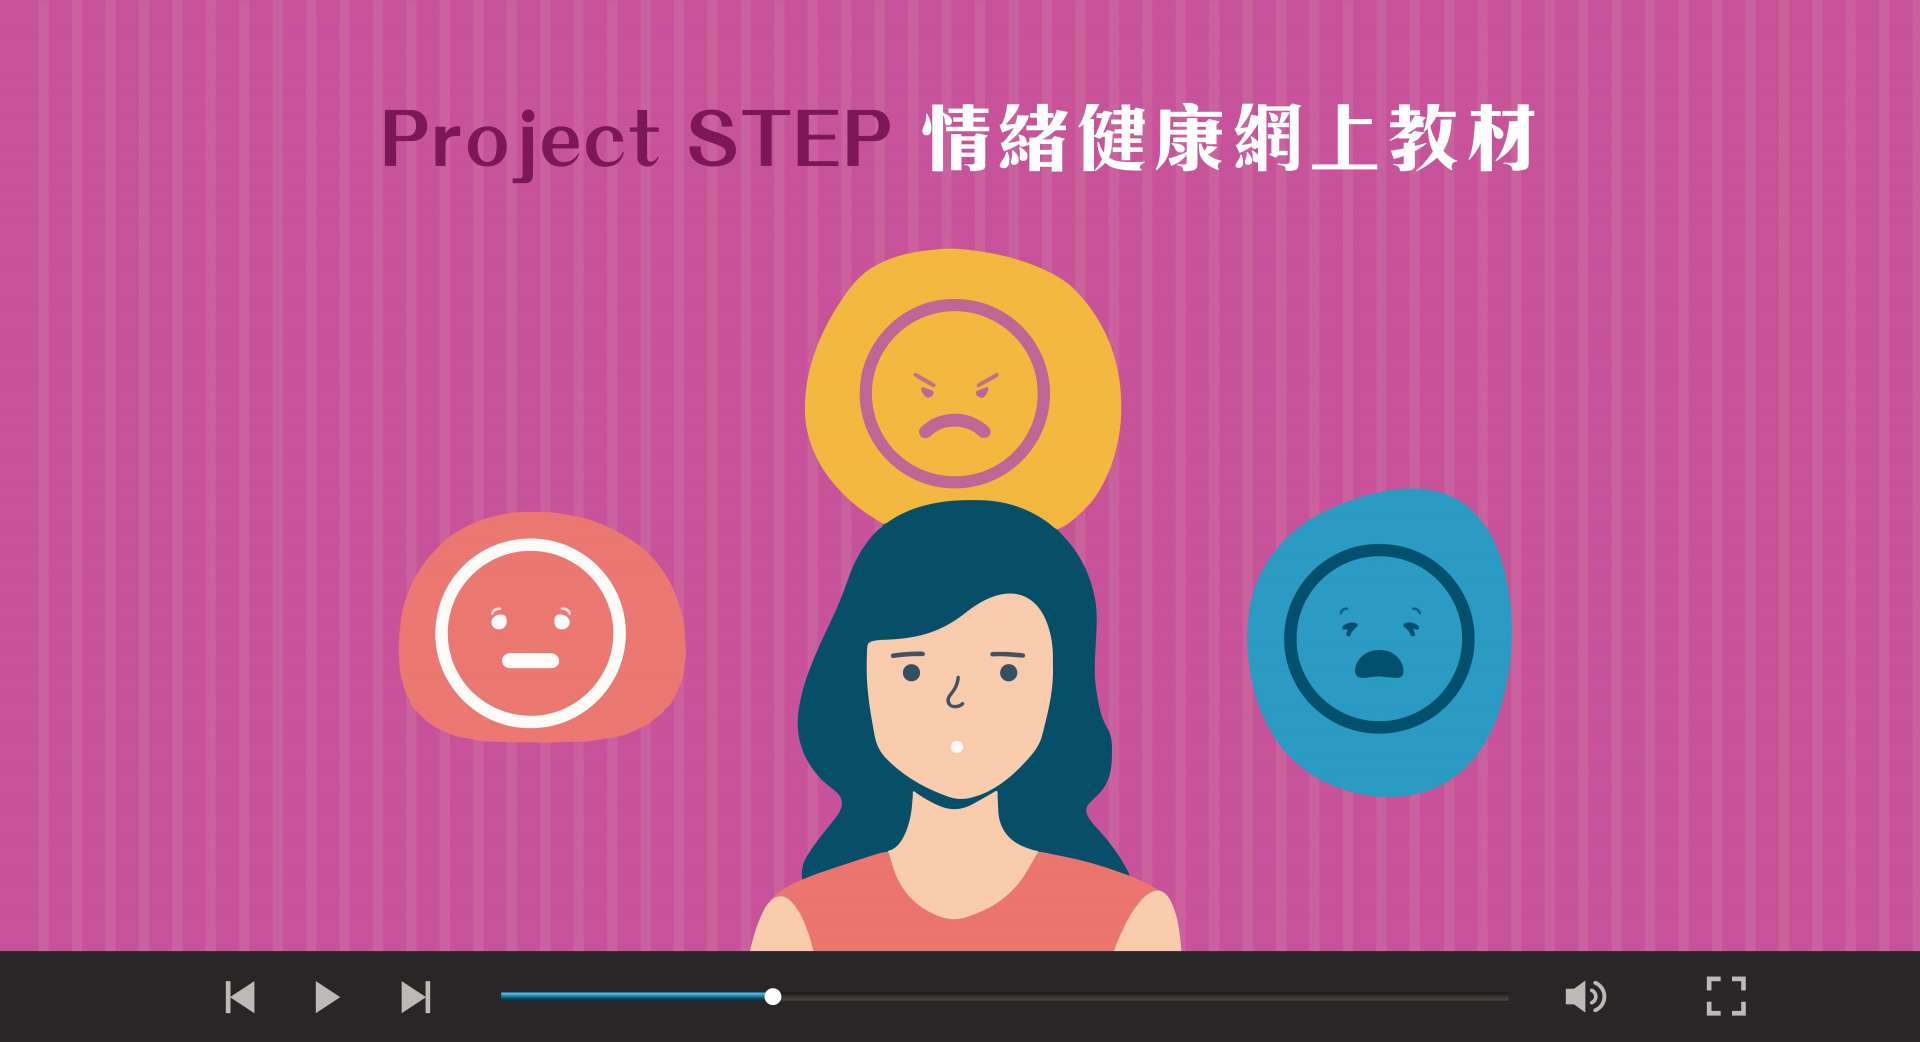 projectstepcover_工作區域 1